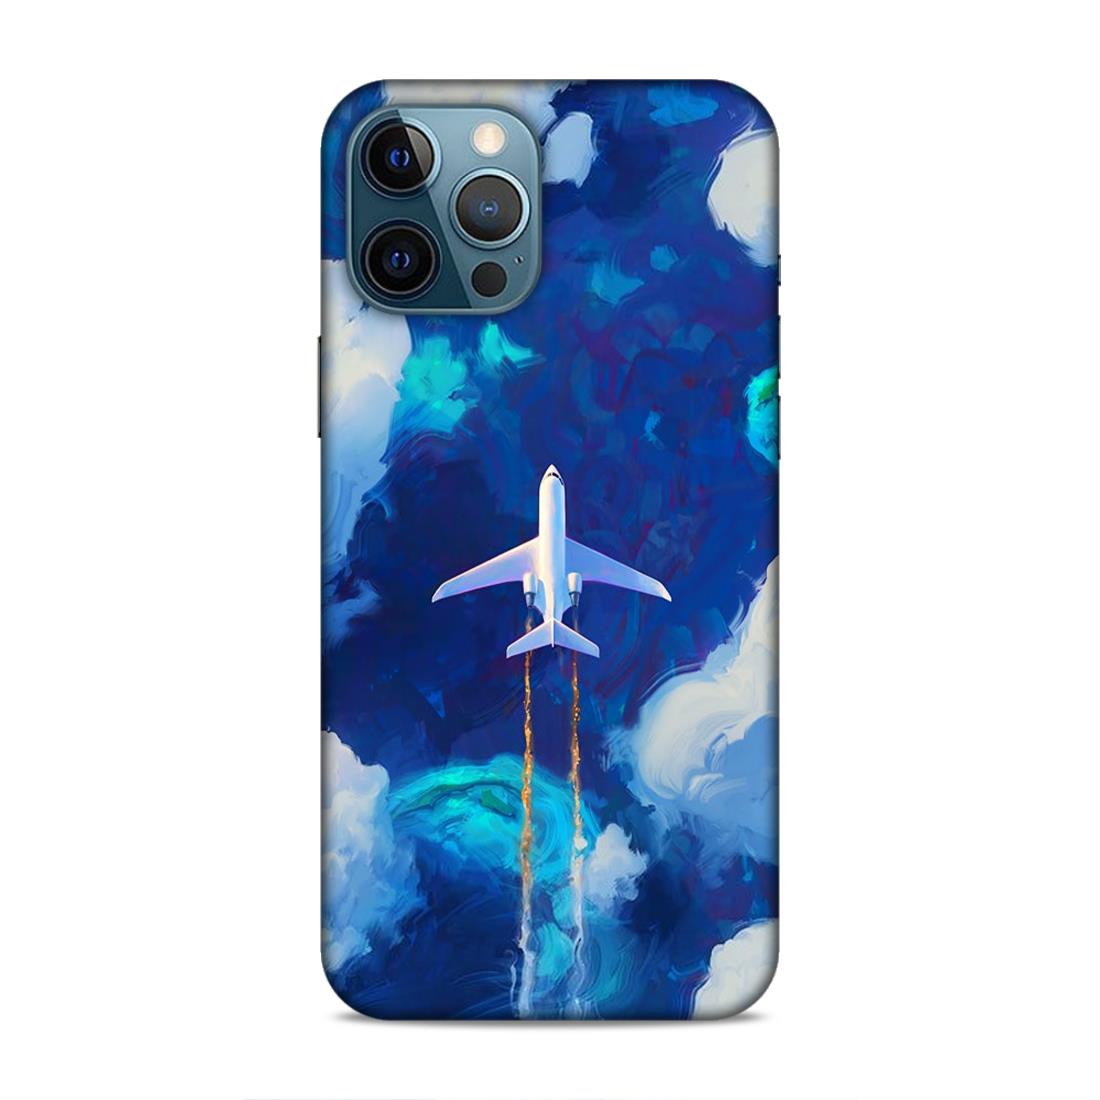 Aeroplane In The Sky Hard Back Case For Apple iPhone 12 Pro Max